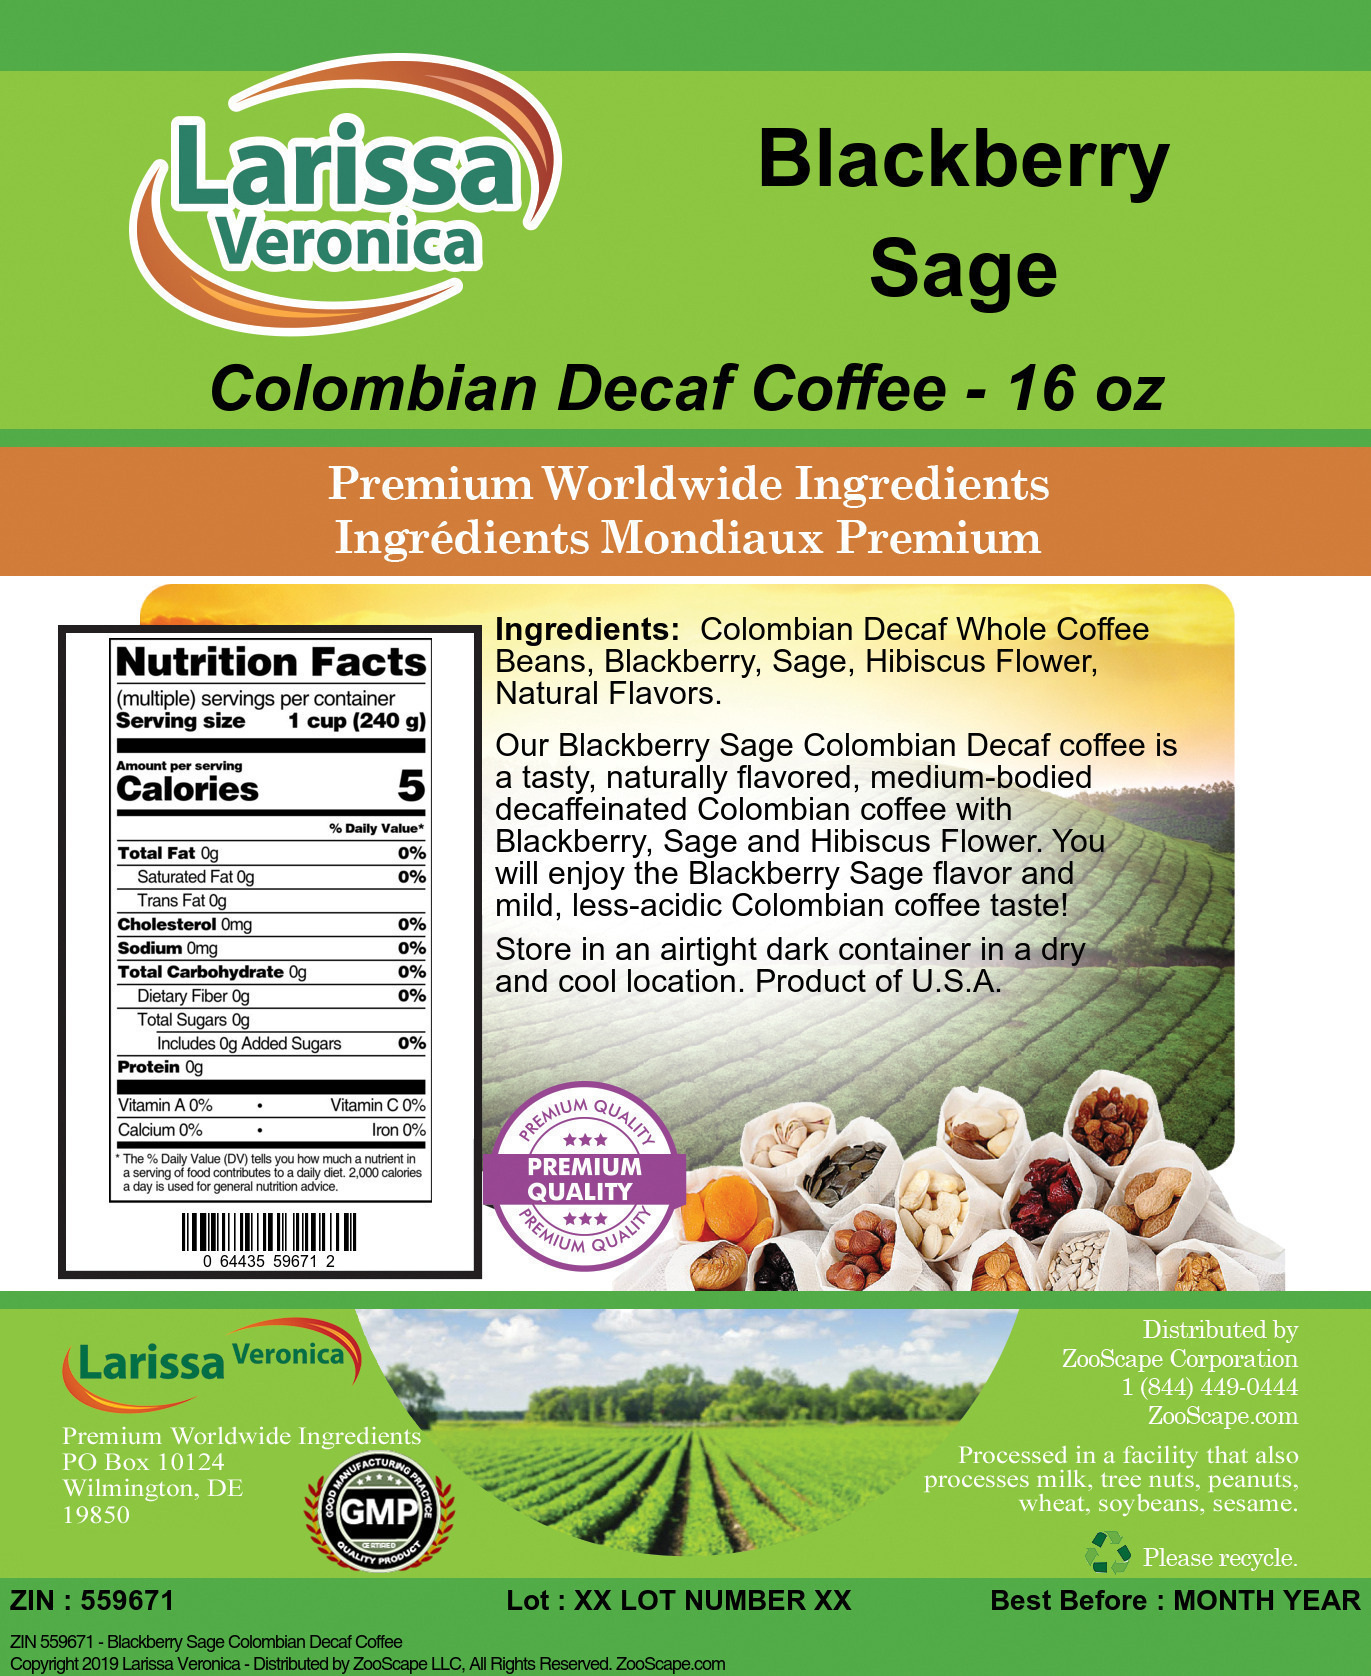 Blackberry Sage Colombian Decaf Coffee - Label